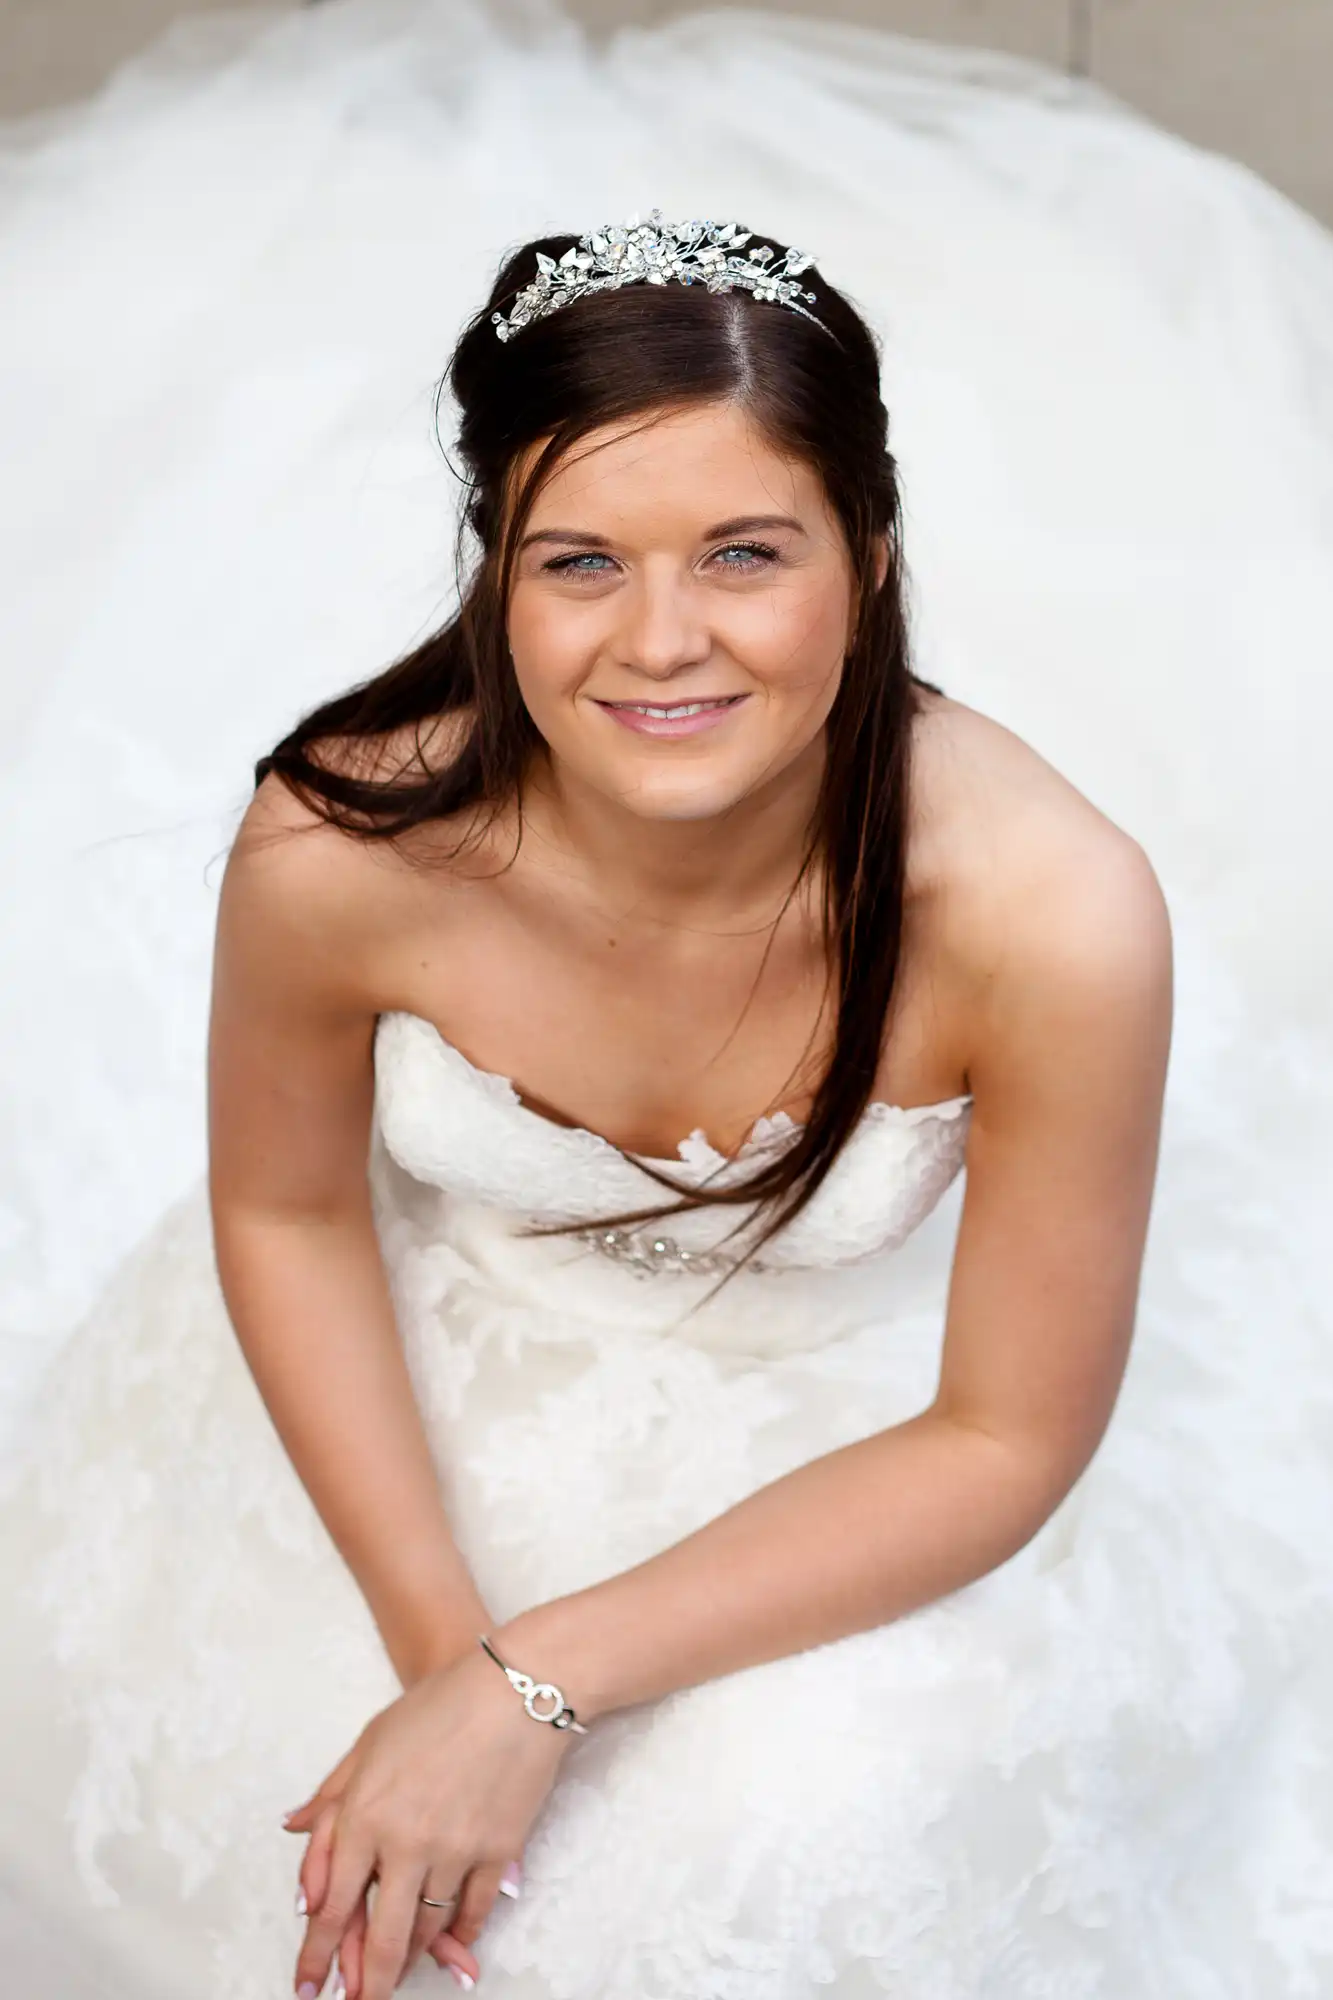 A smiling bride in a white gown and tiara sits elegantly, looking up at the camera.